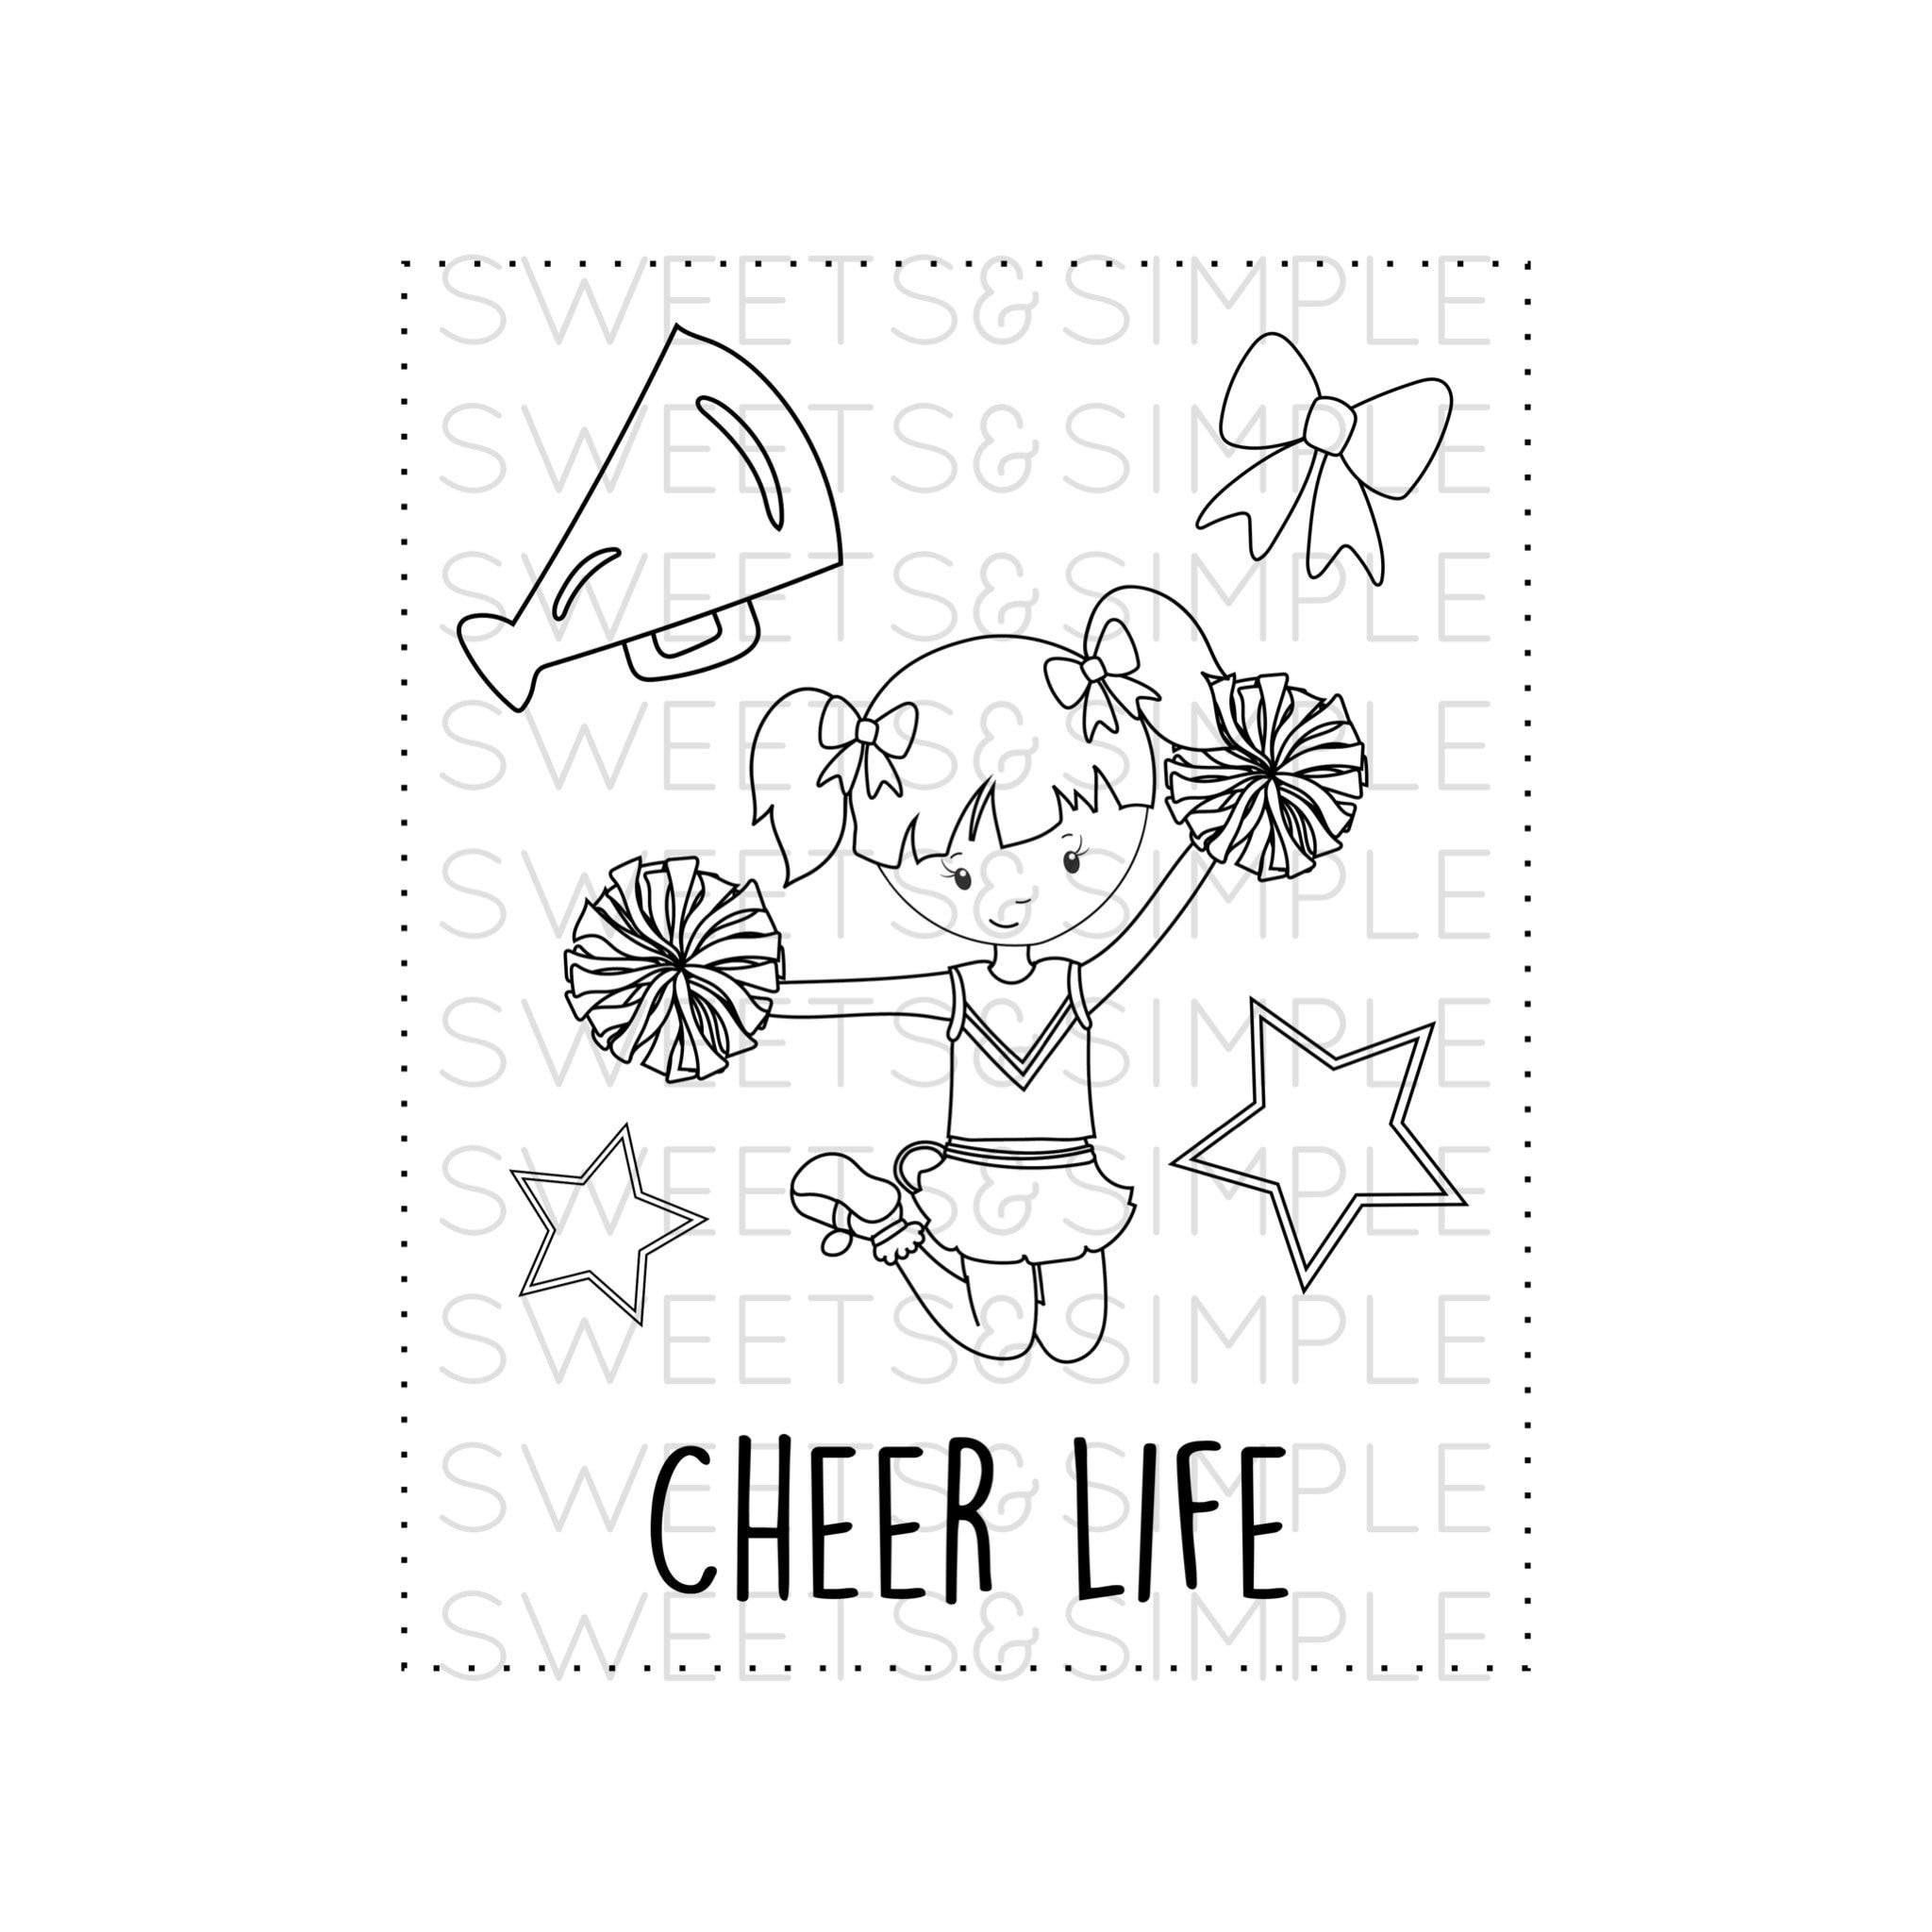 Cheerleader coloring page cheer cheer life chearleading coloring sheet activity page printable instant download